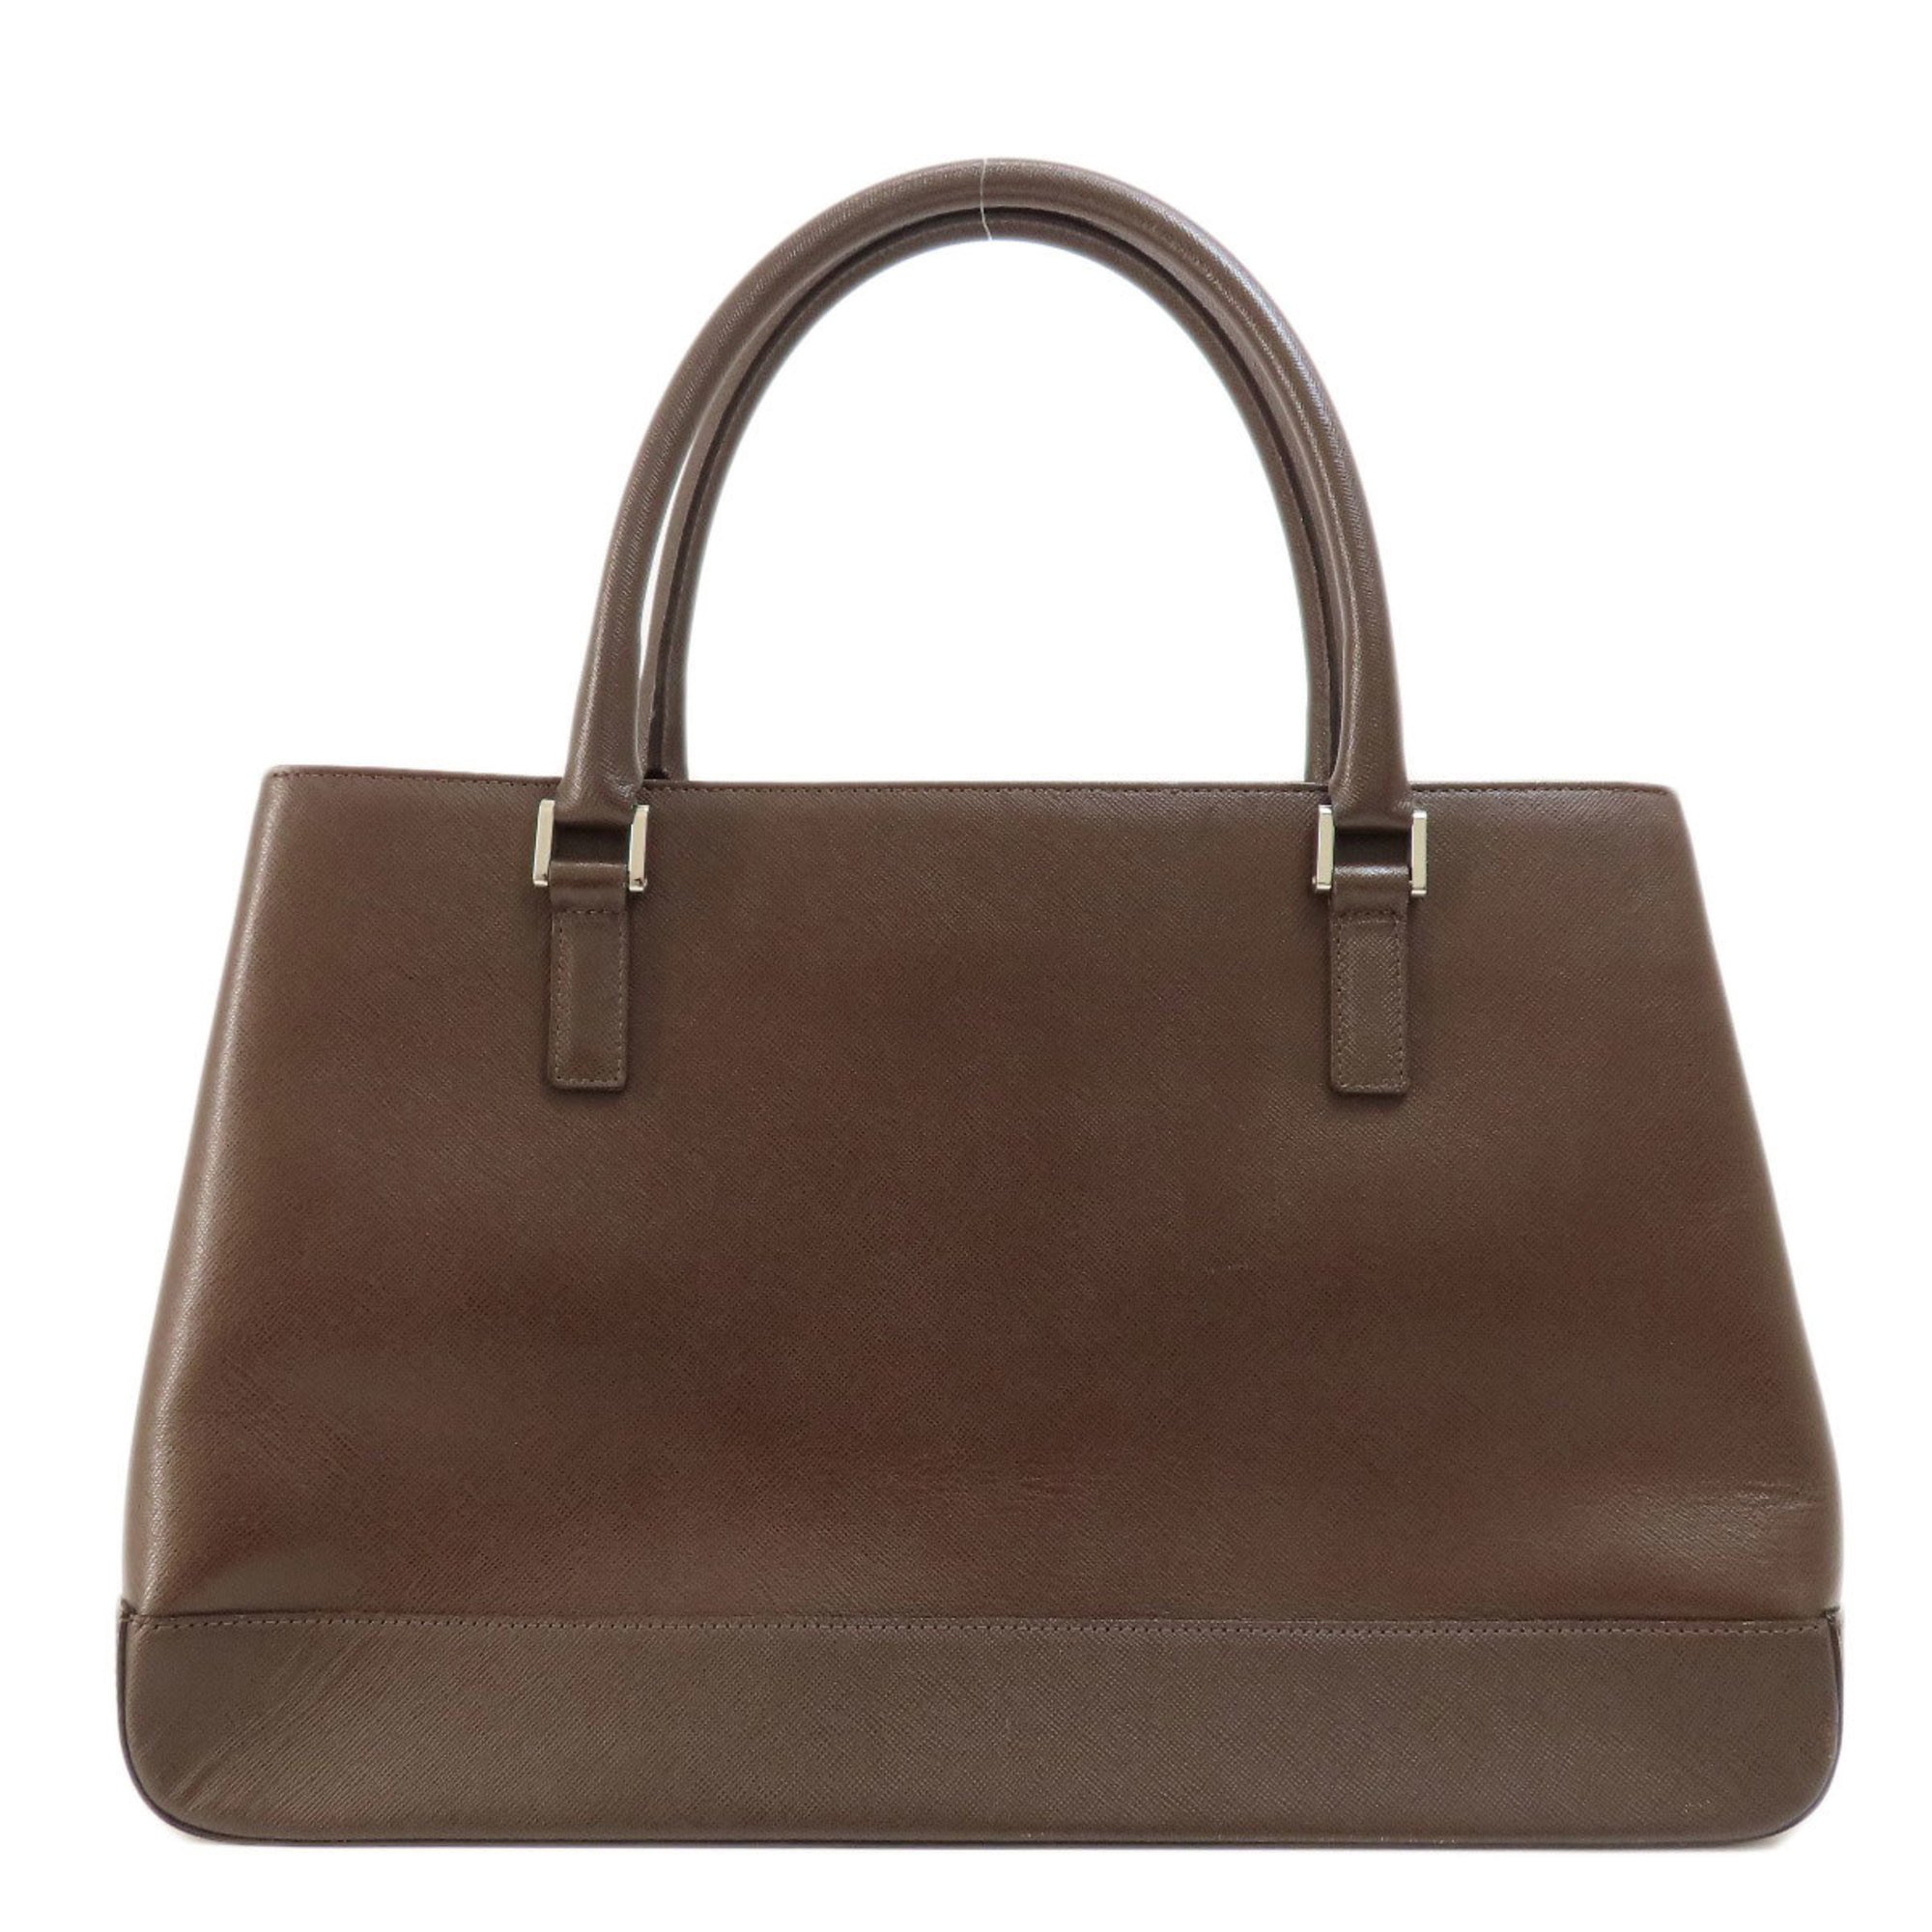 Burberry Leather Tote Bag for Women